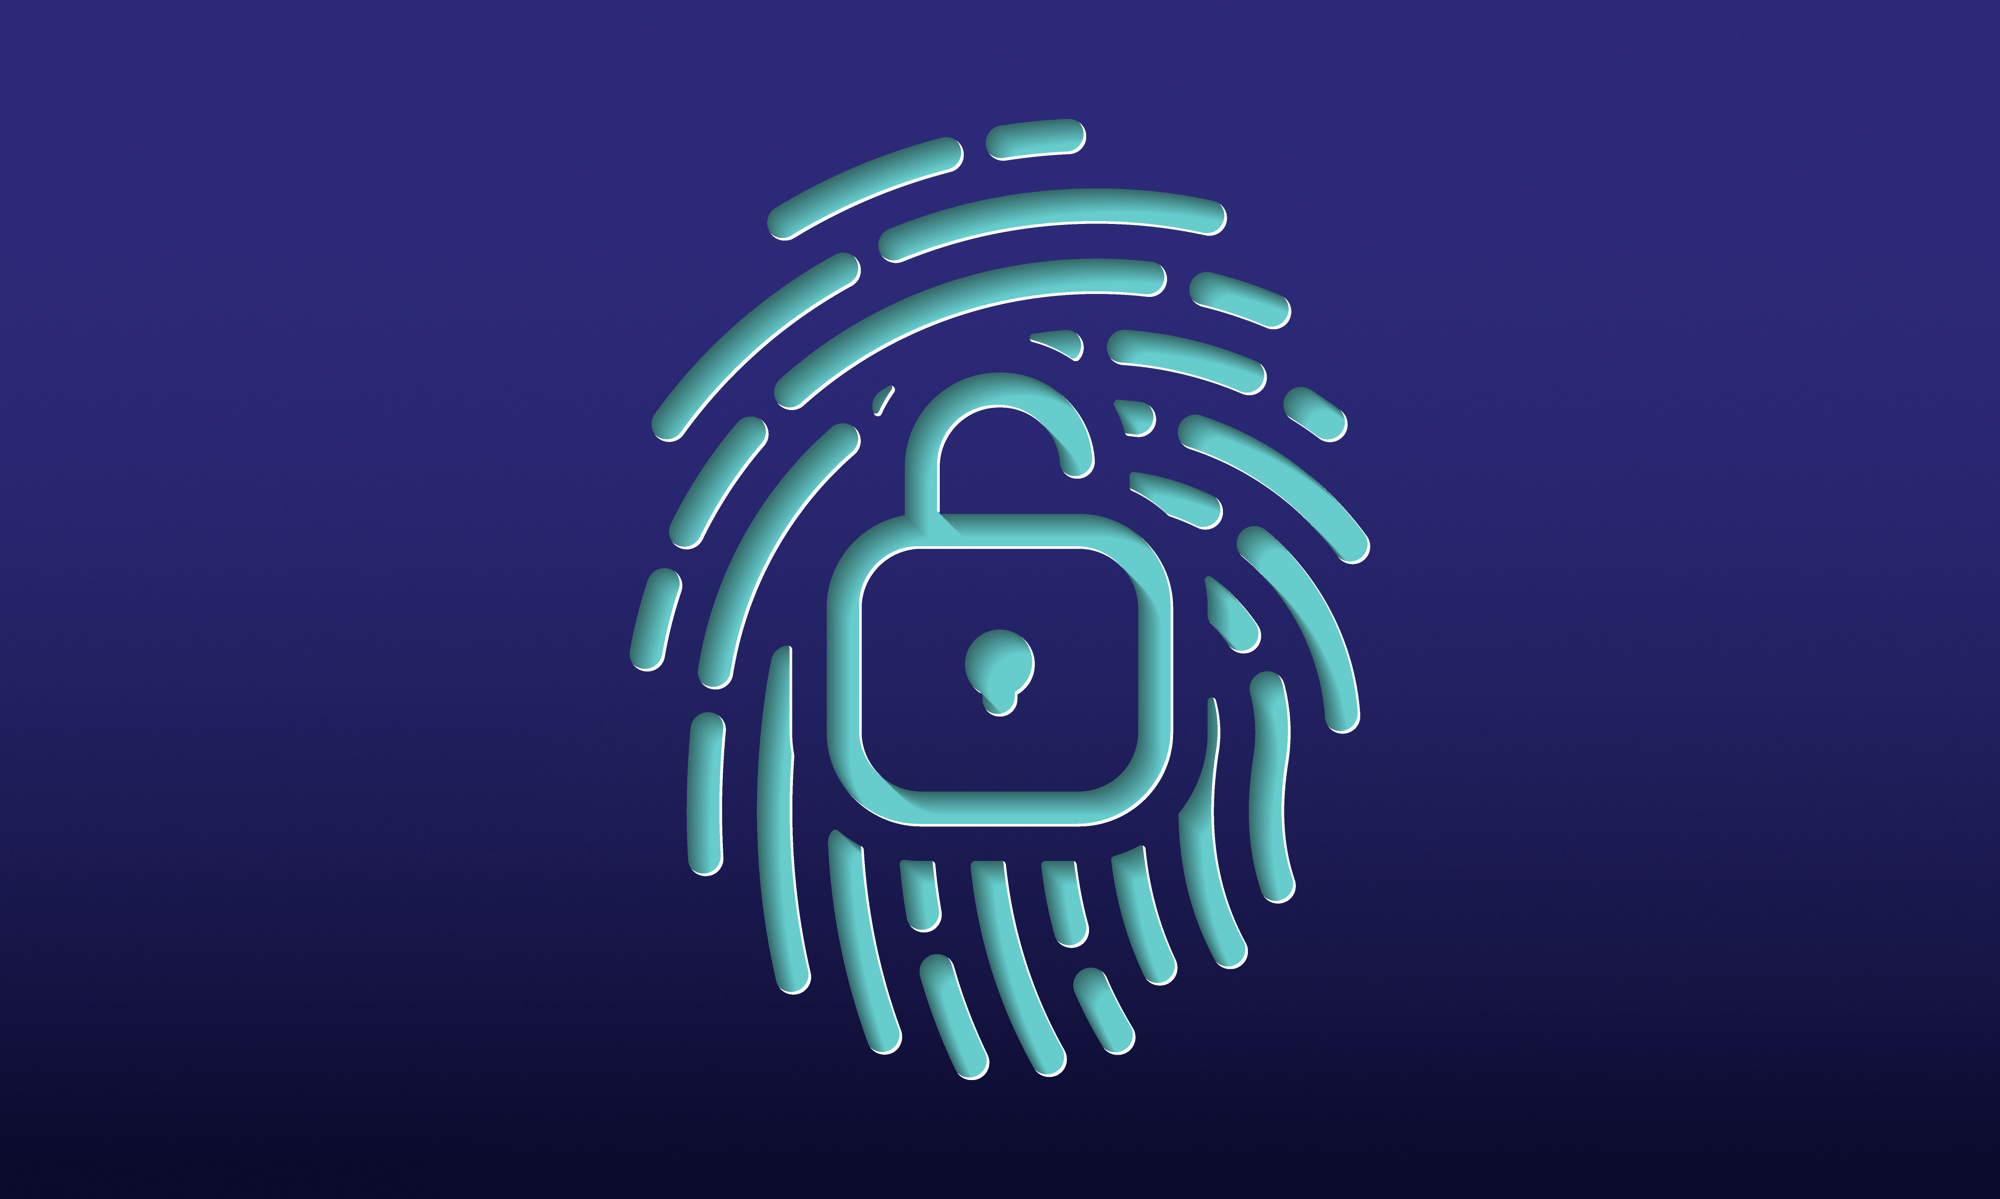 welliba vector finger print and lock [Converted]